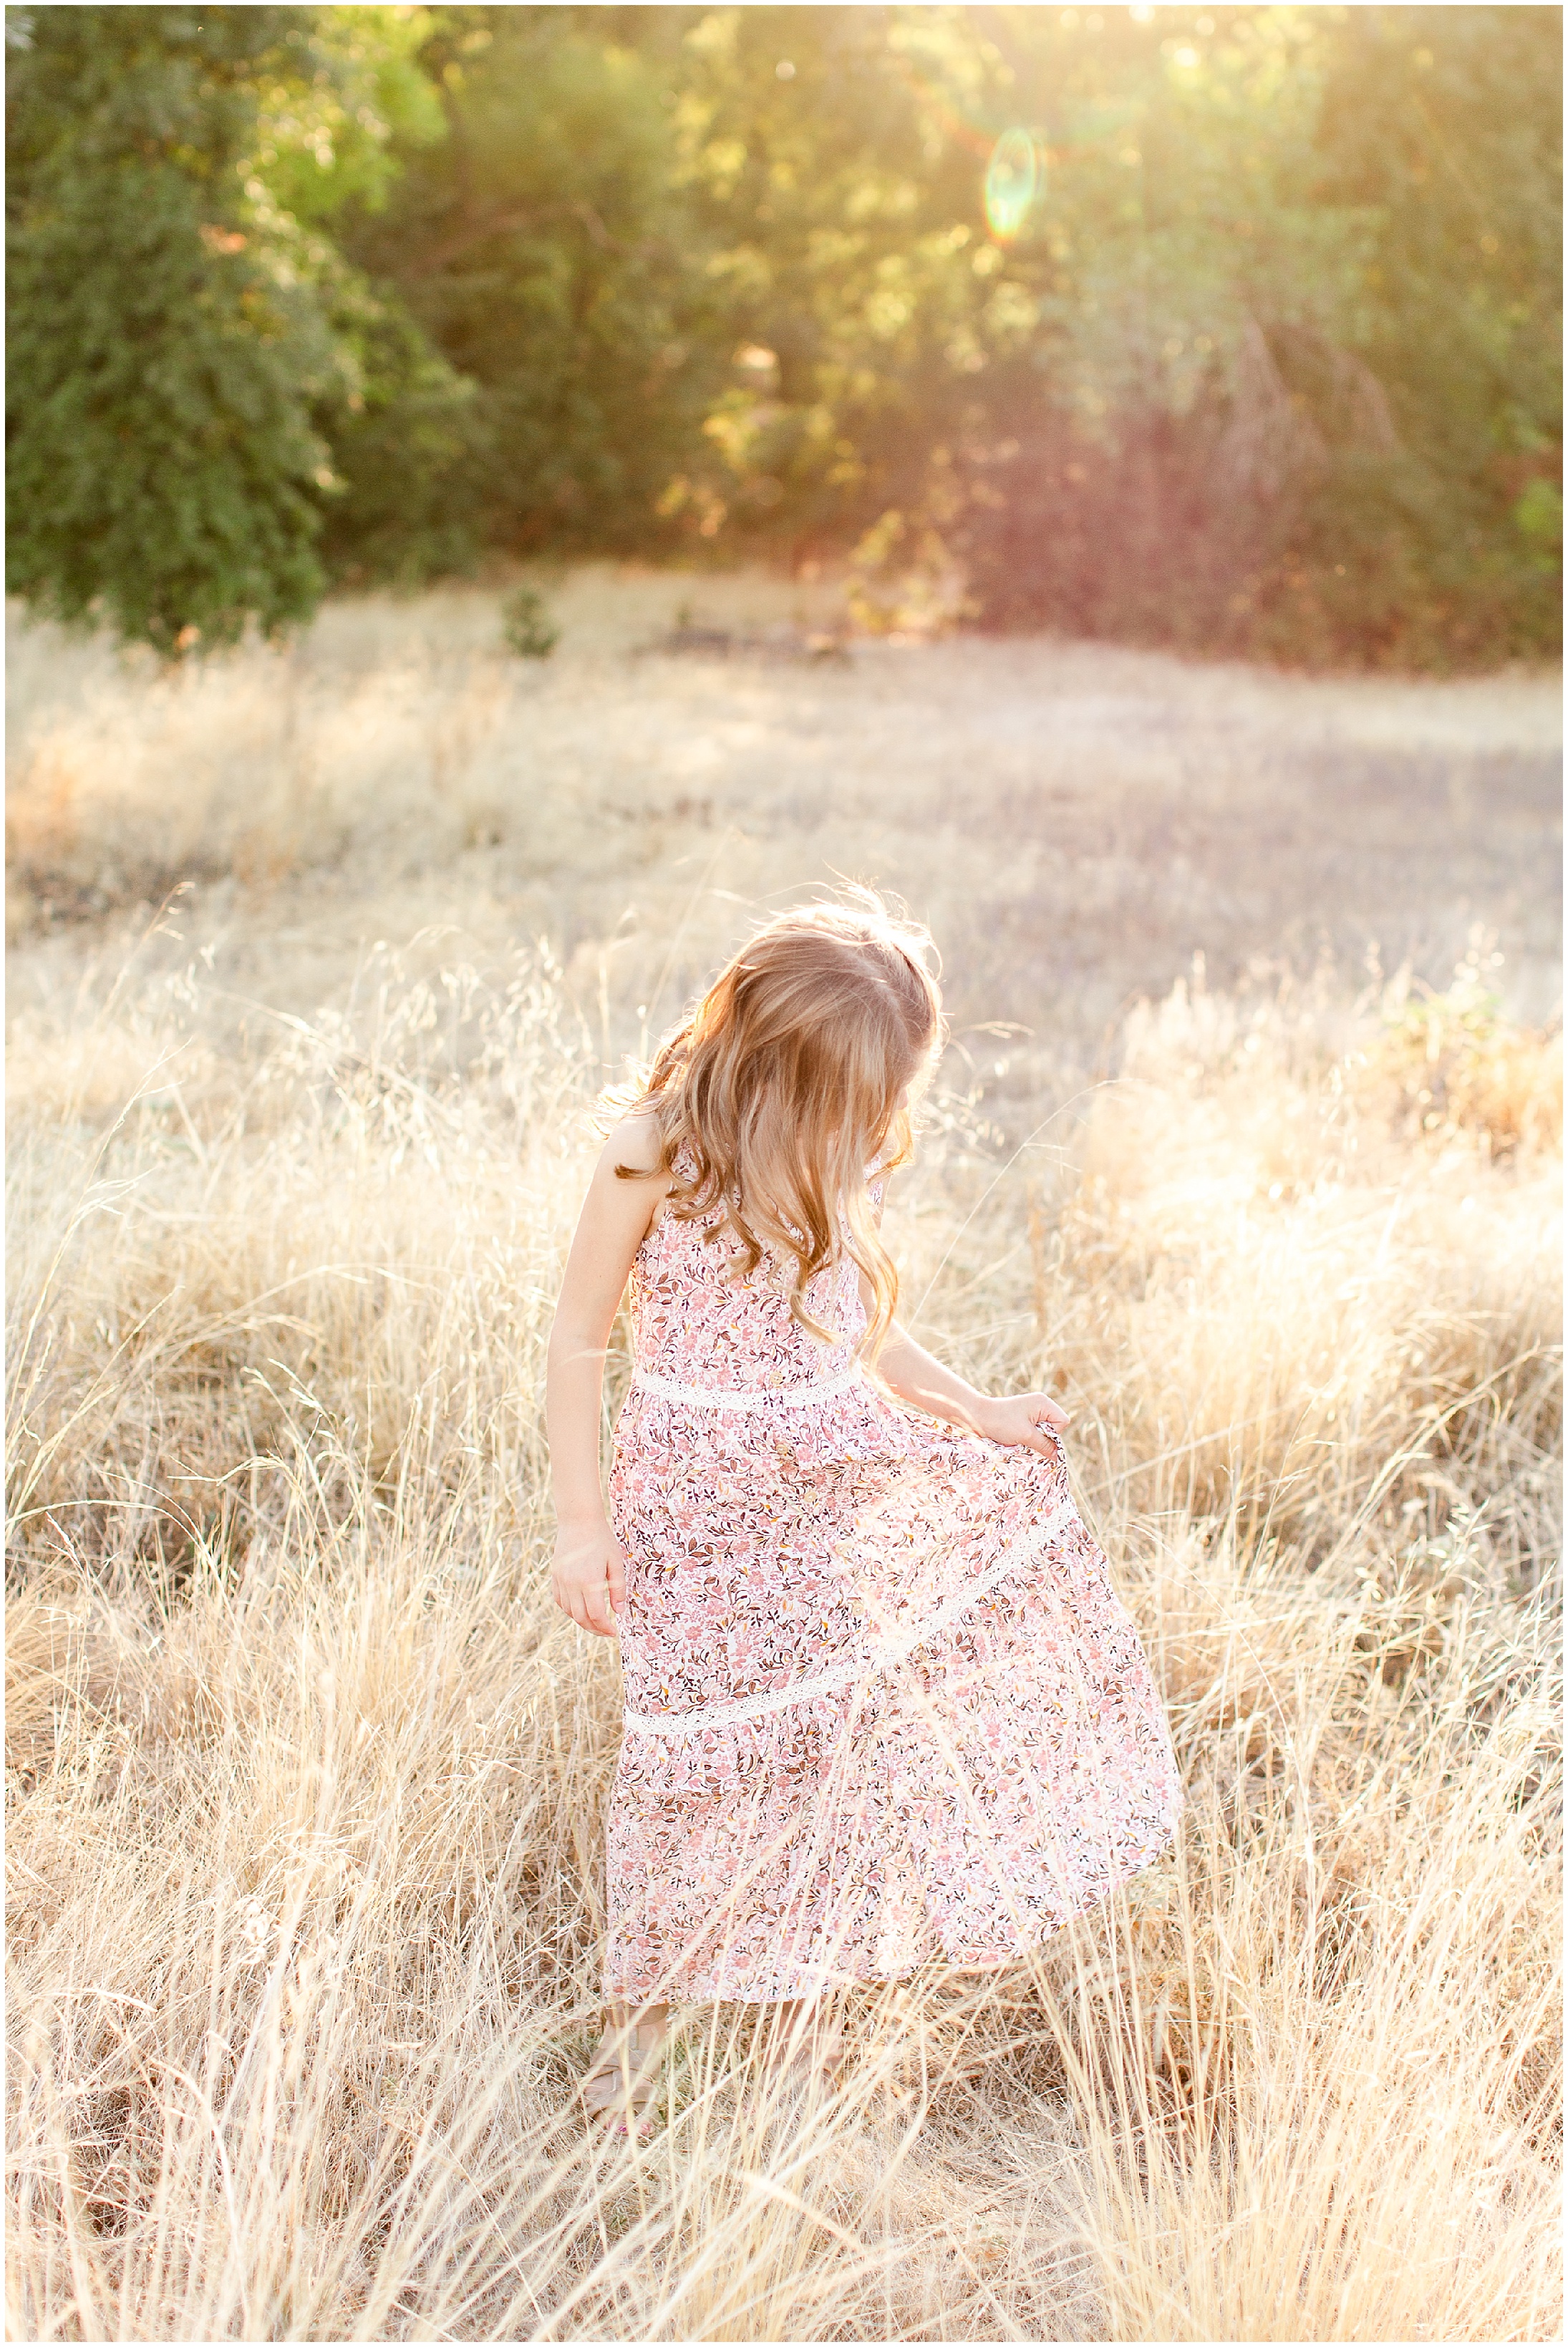 Romantic Grassy Fields Family Portrait Session at Sunset Chico California,